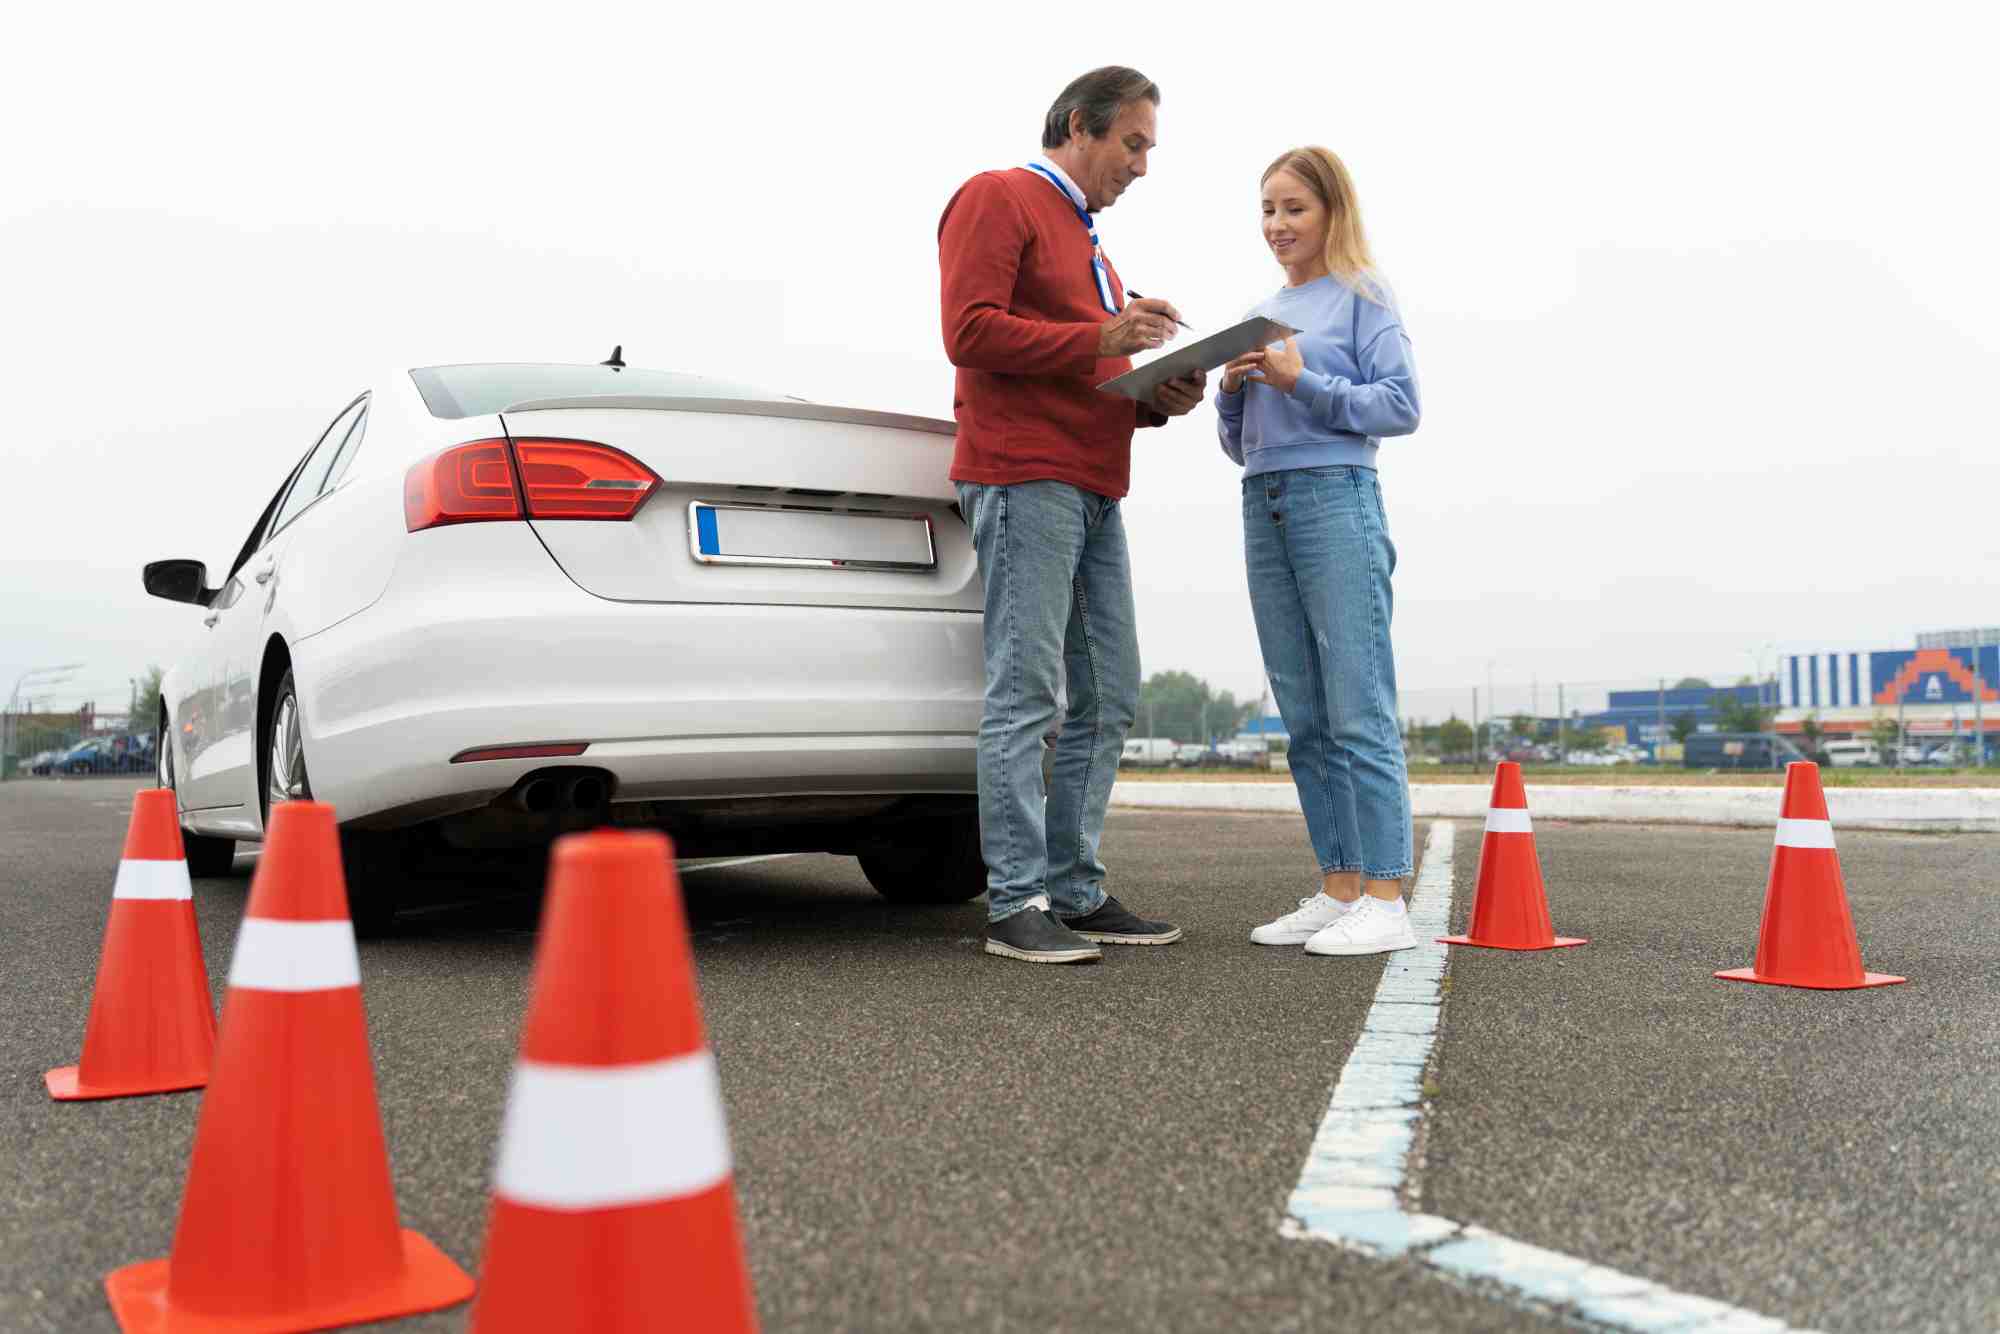 RTA Driving Test in the UAE